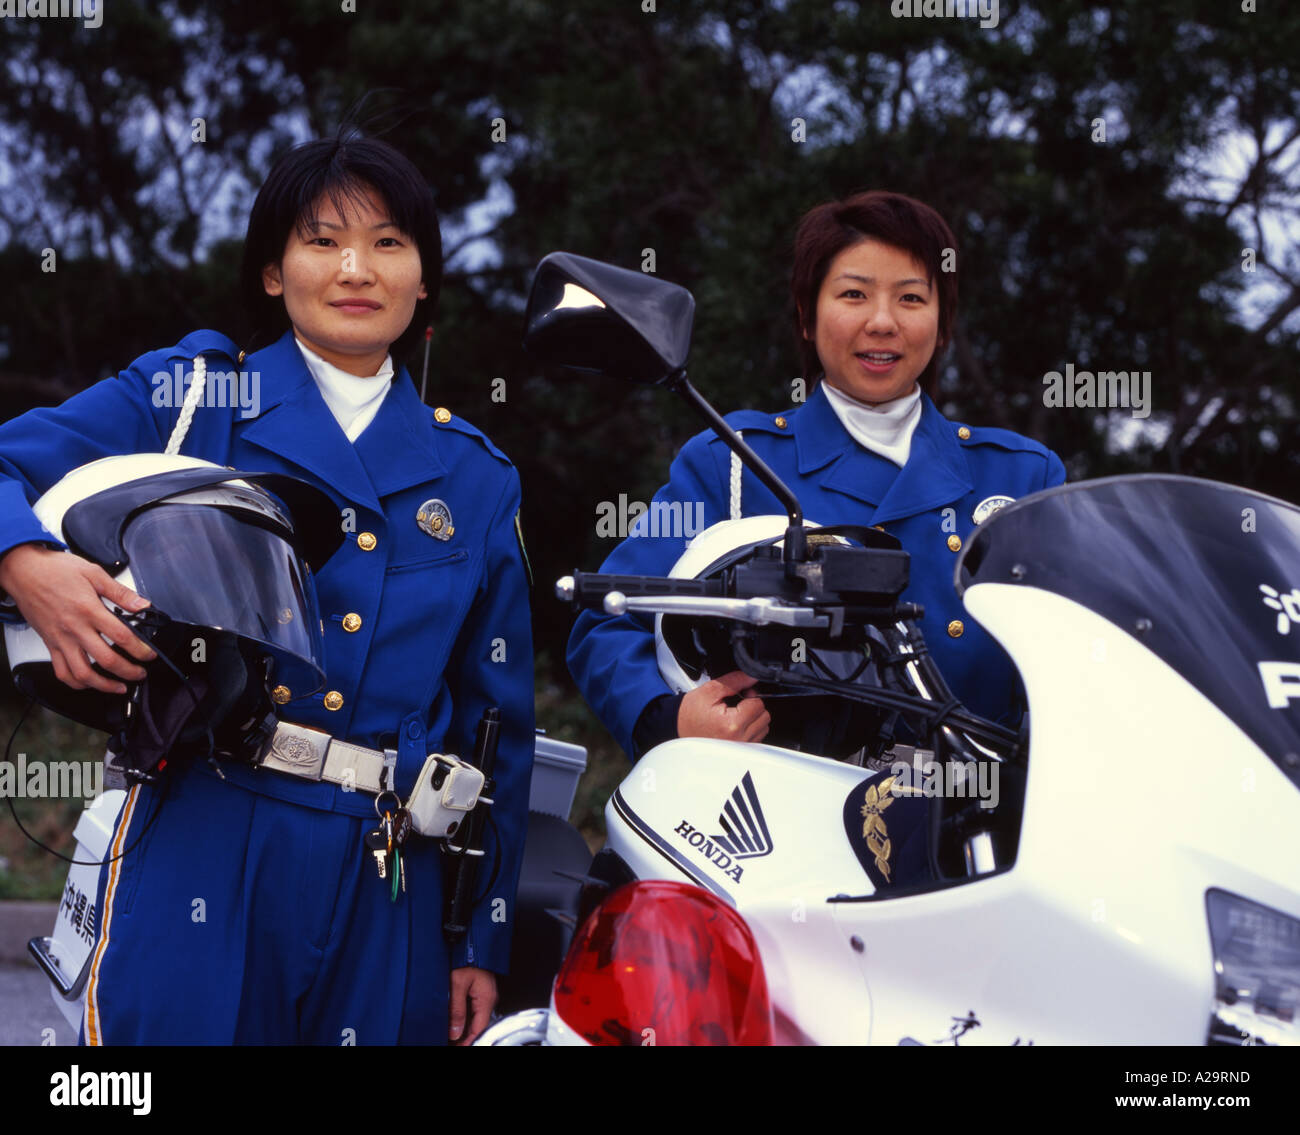 Female Police Motorcycle Officers and their Honda 750cc bike, Okianwa, Japan Stock Photo